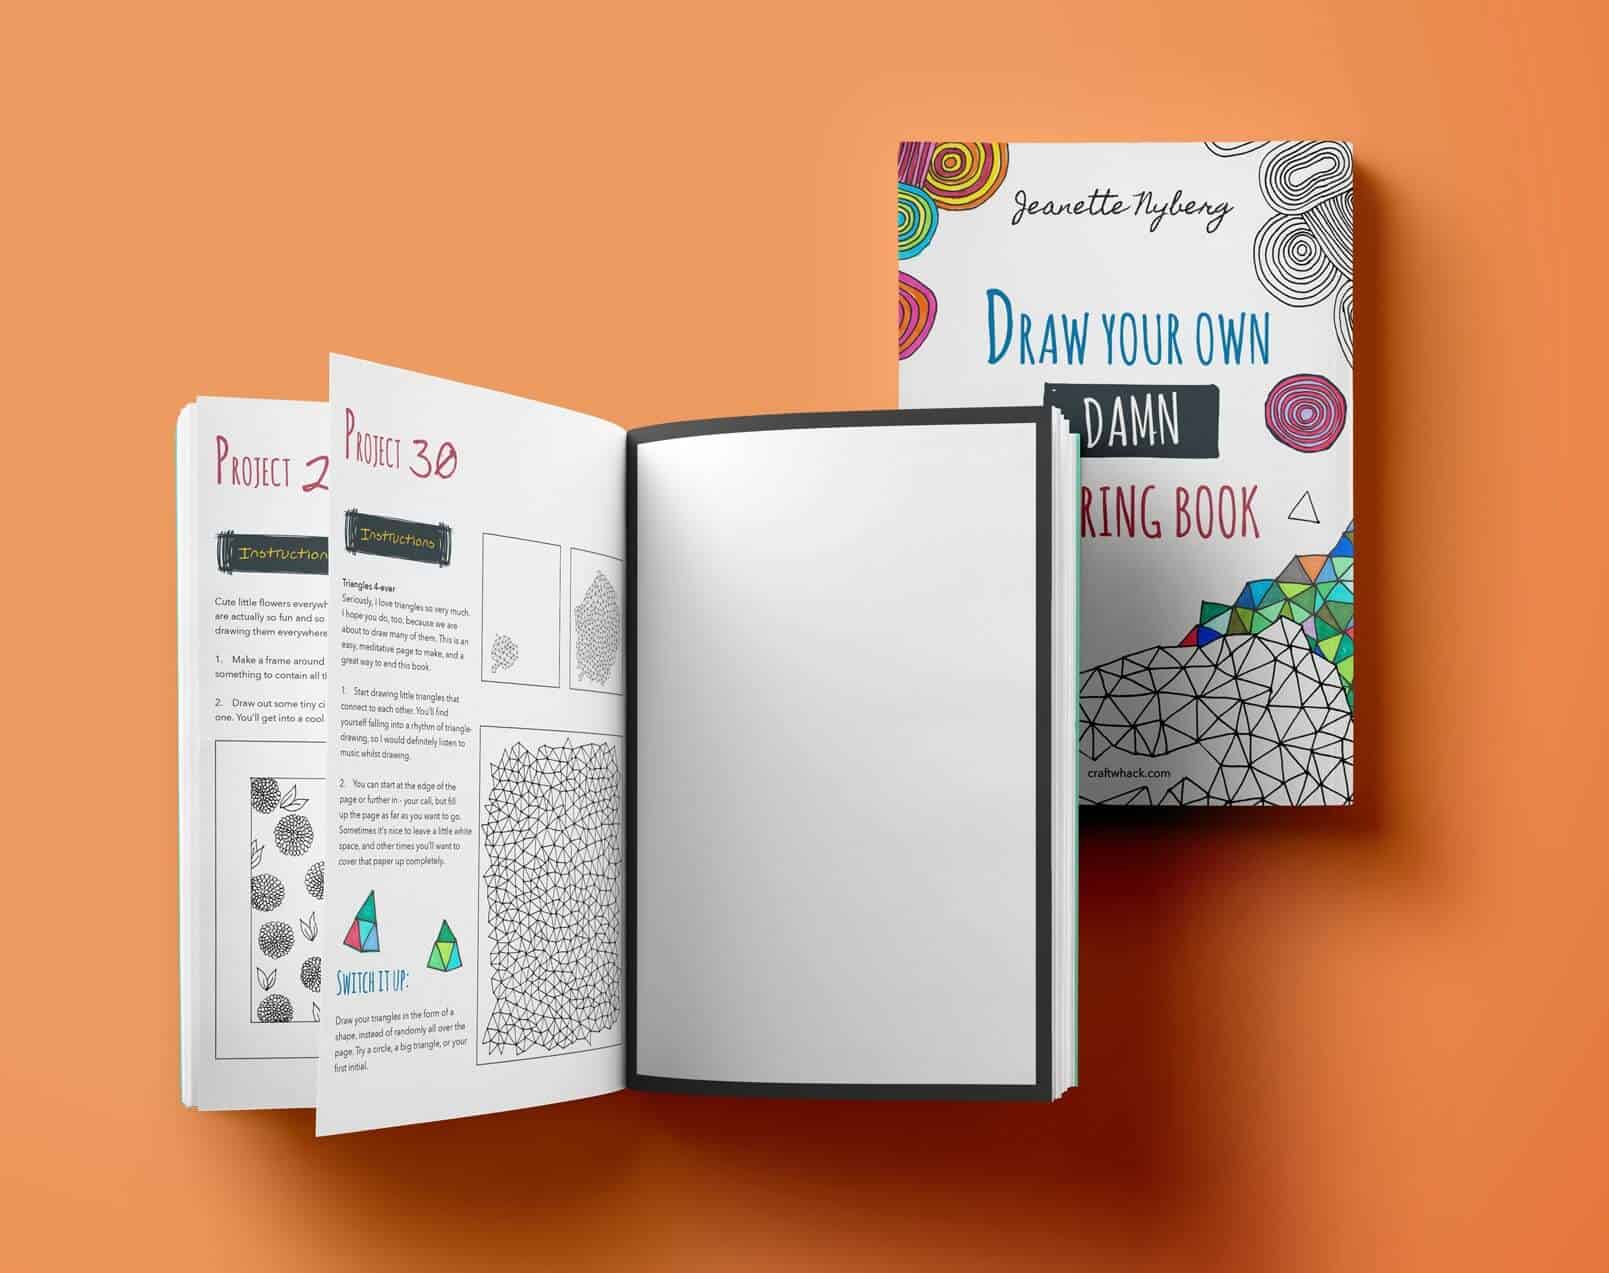 Draw Your Own Damn Coloring Book by Jeanette Nyberg